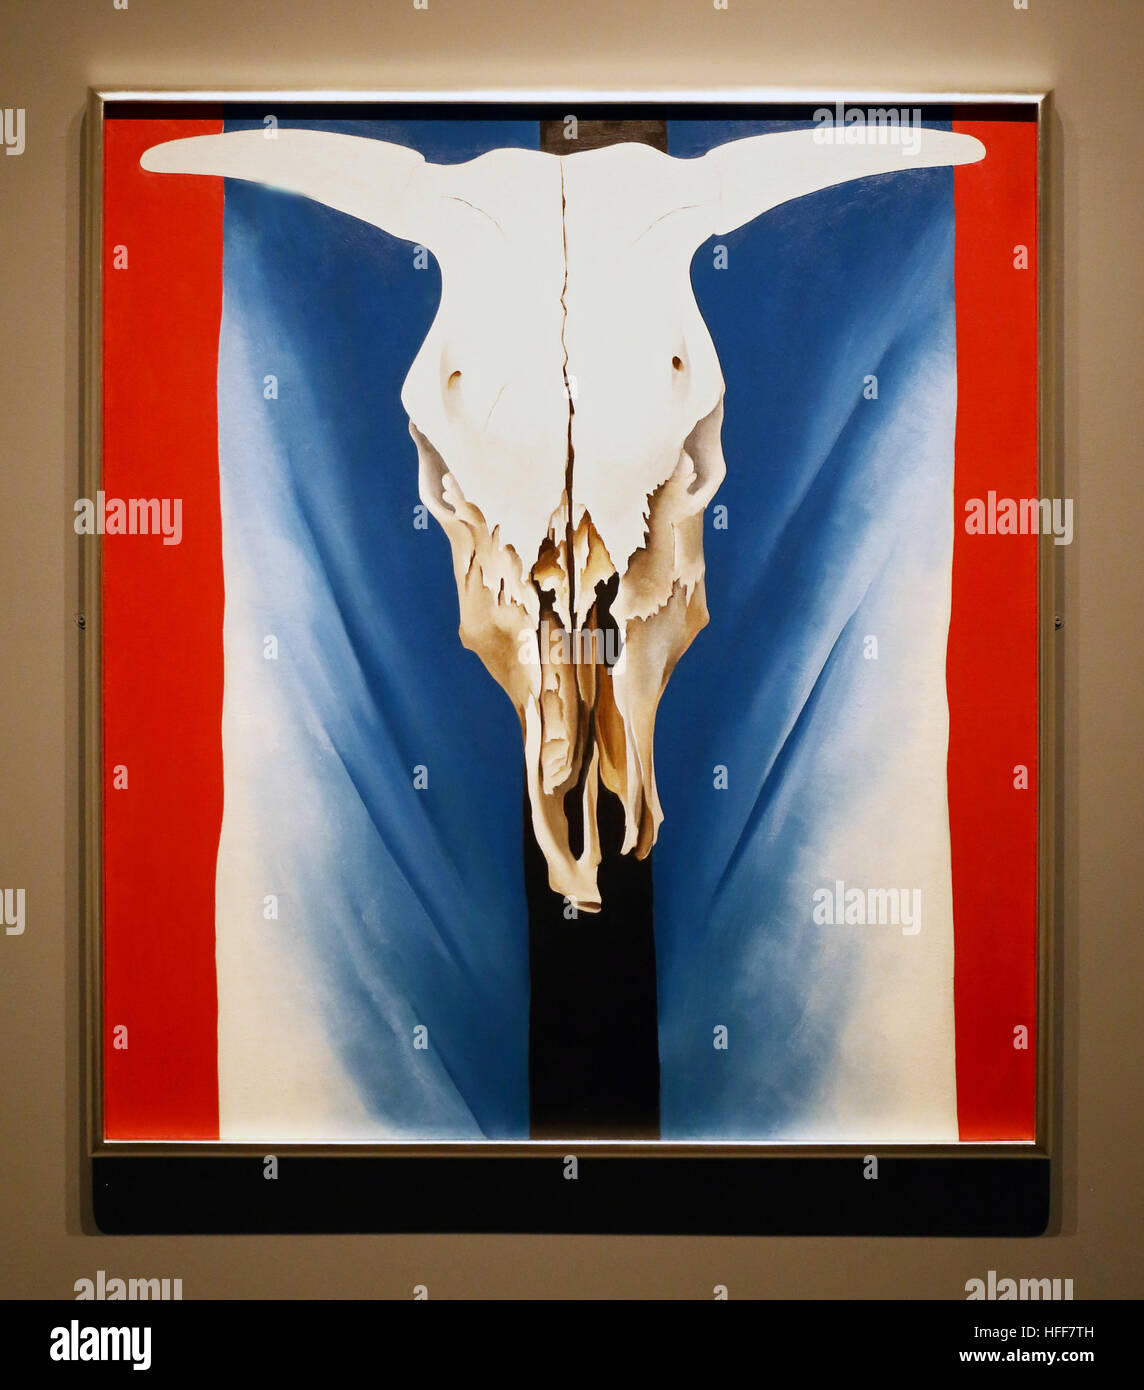 Oil painting of "Cow's Skull: Red, White, and Blue"  by American artist Georgia O'Keeffe hanging at the Metropolitan Museum of Art in New York City. Stock Photo